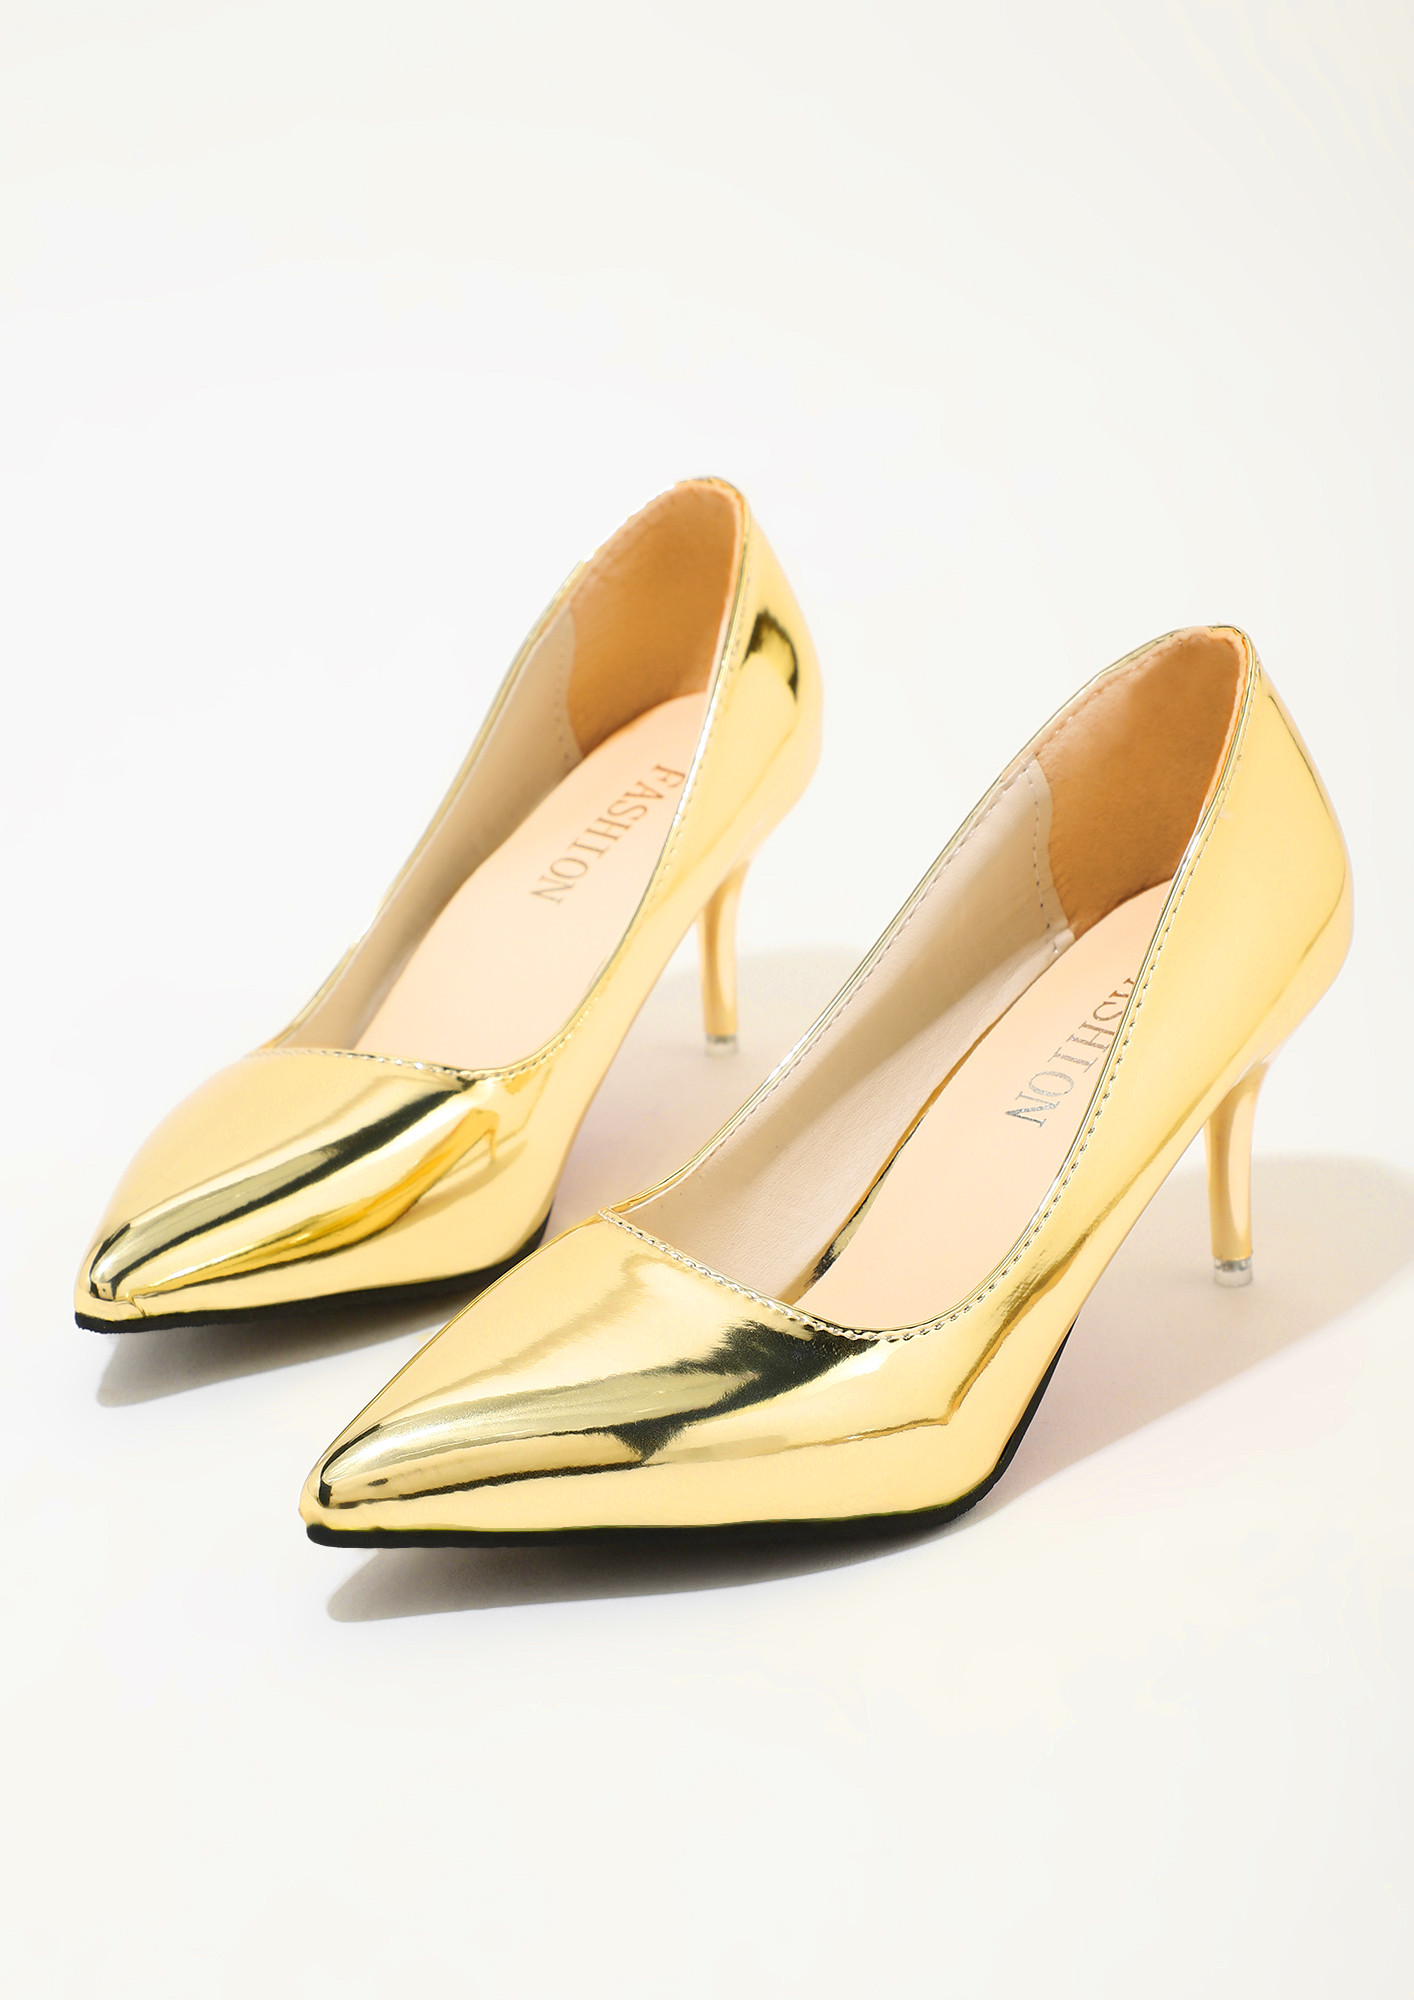 What are stilettos? What's the Difference Between Stilettos vs Pumps?